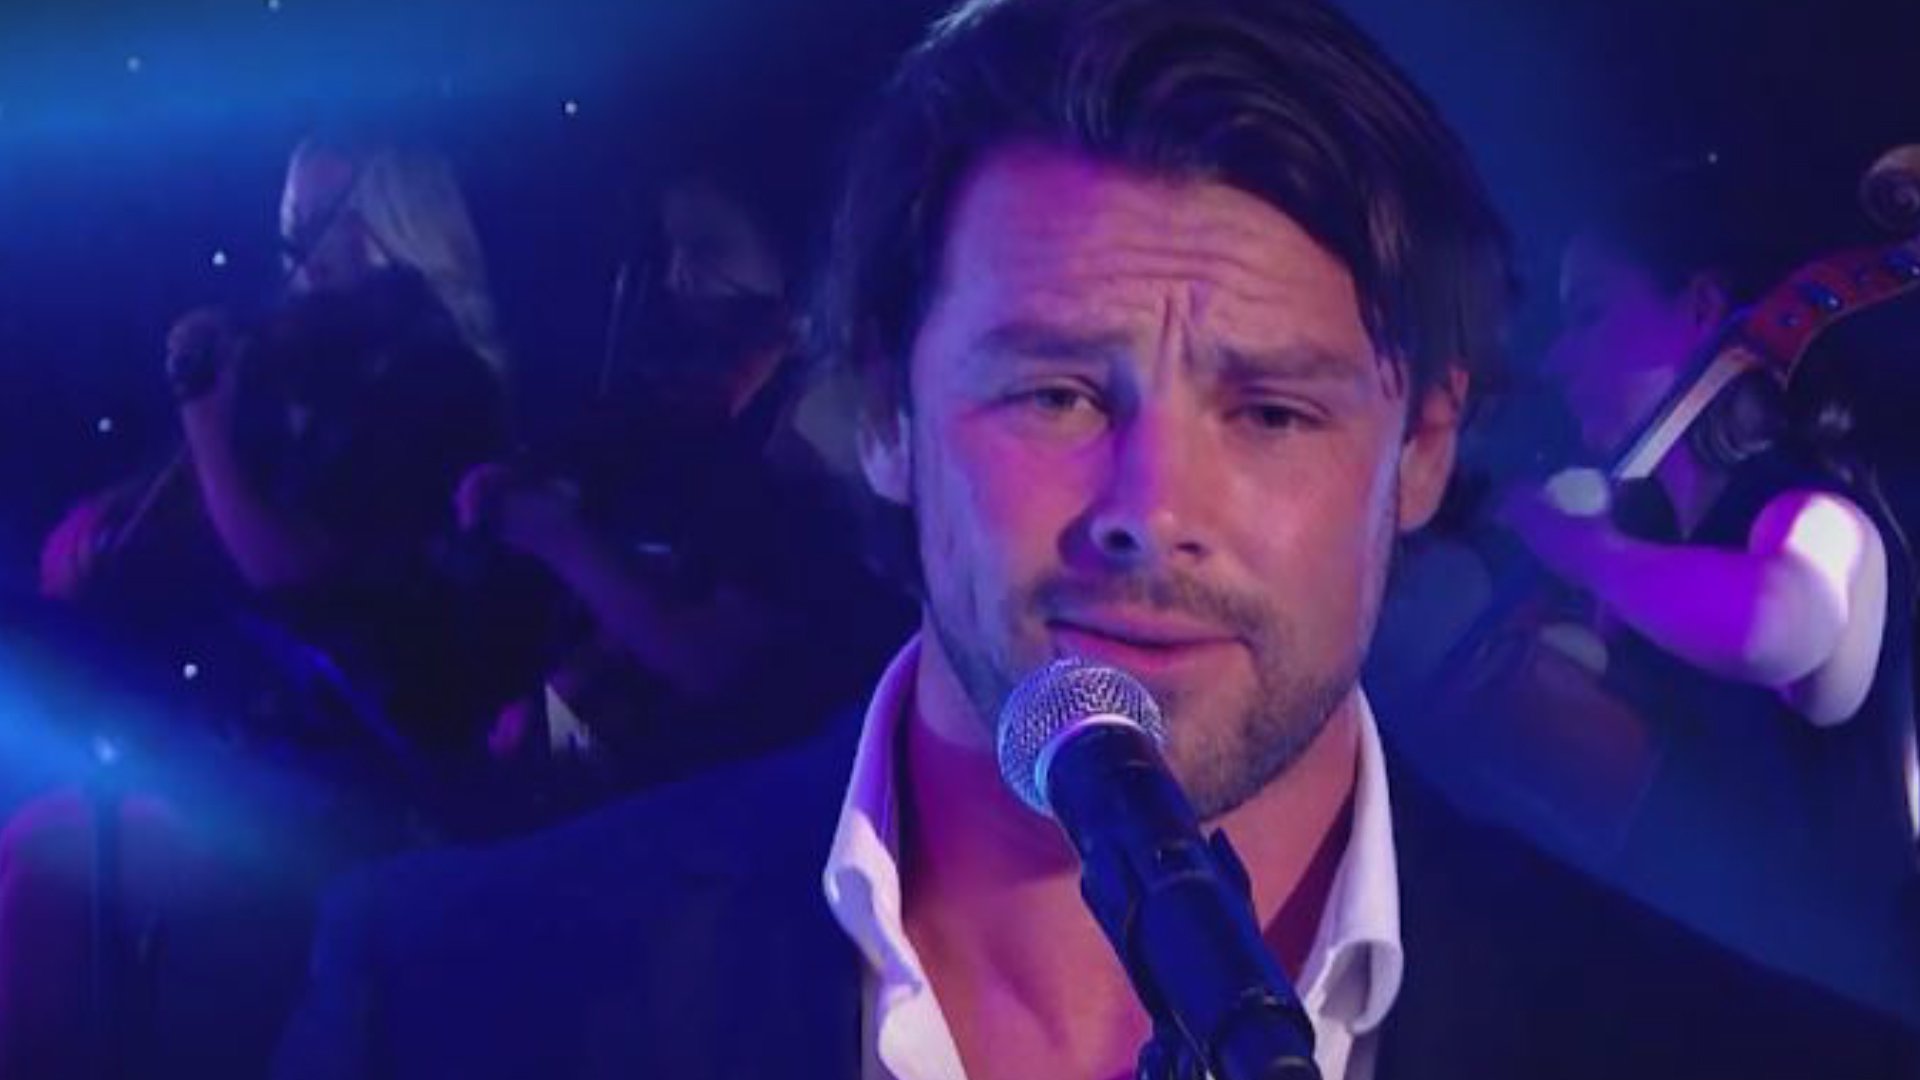 Watch: Ben Foden sings 'John Legend - All of Me' on A League of Their Own